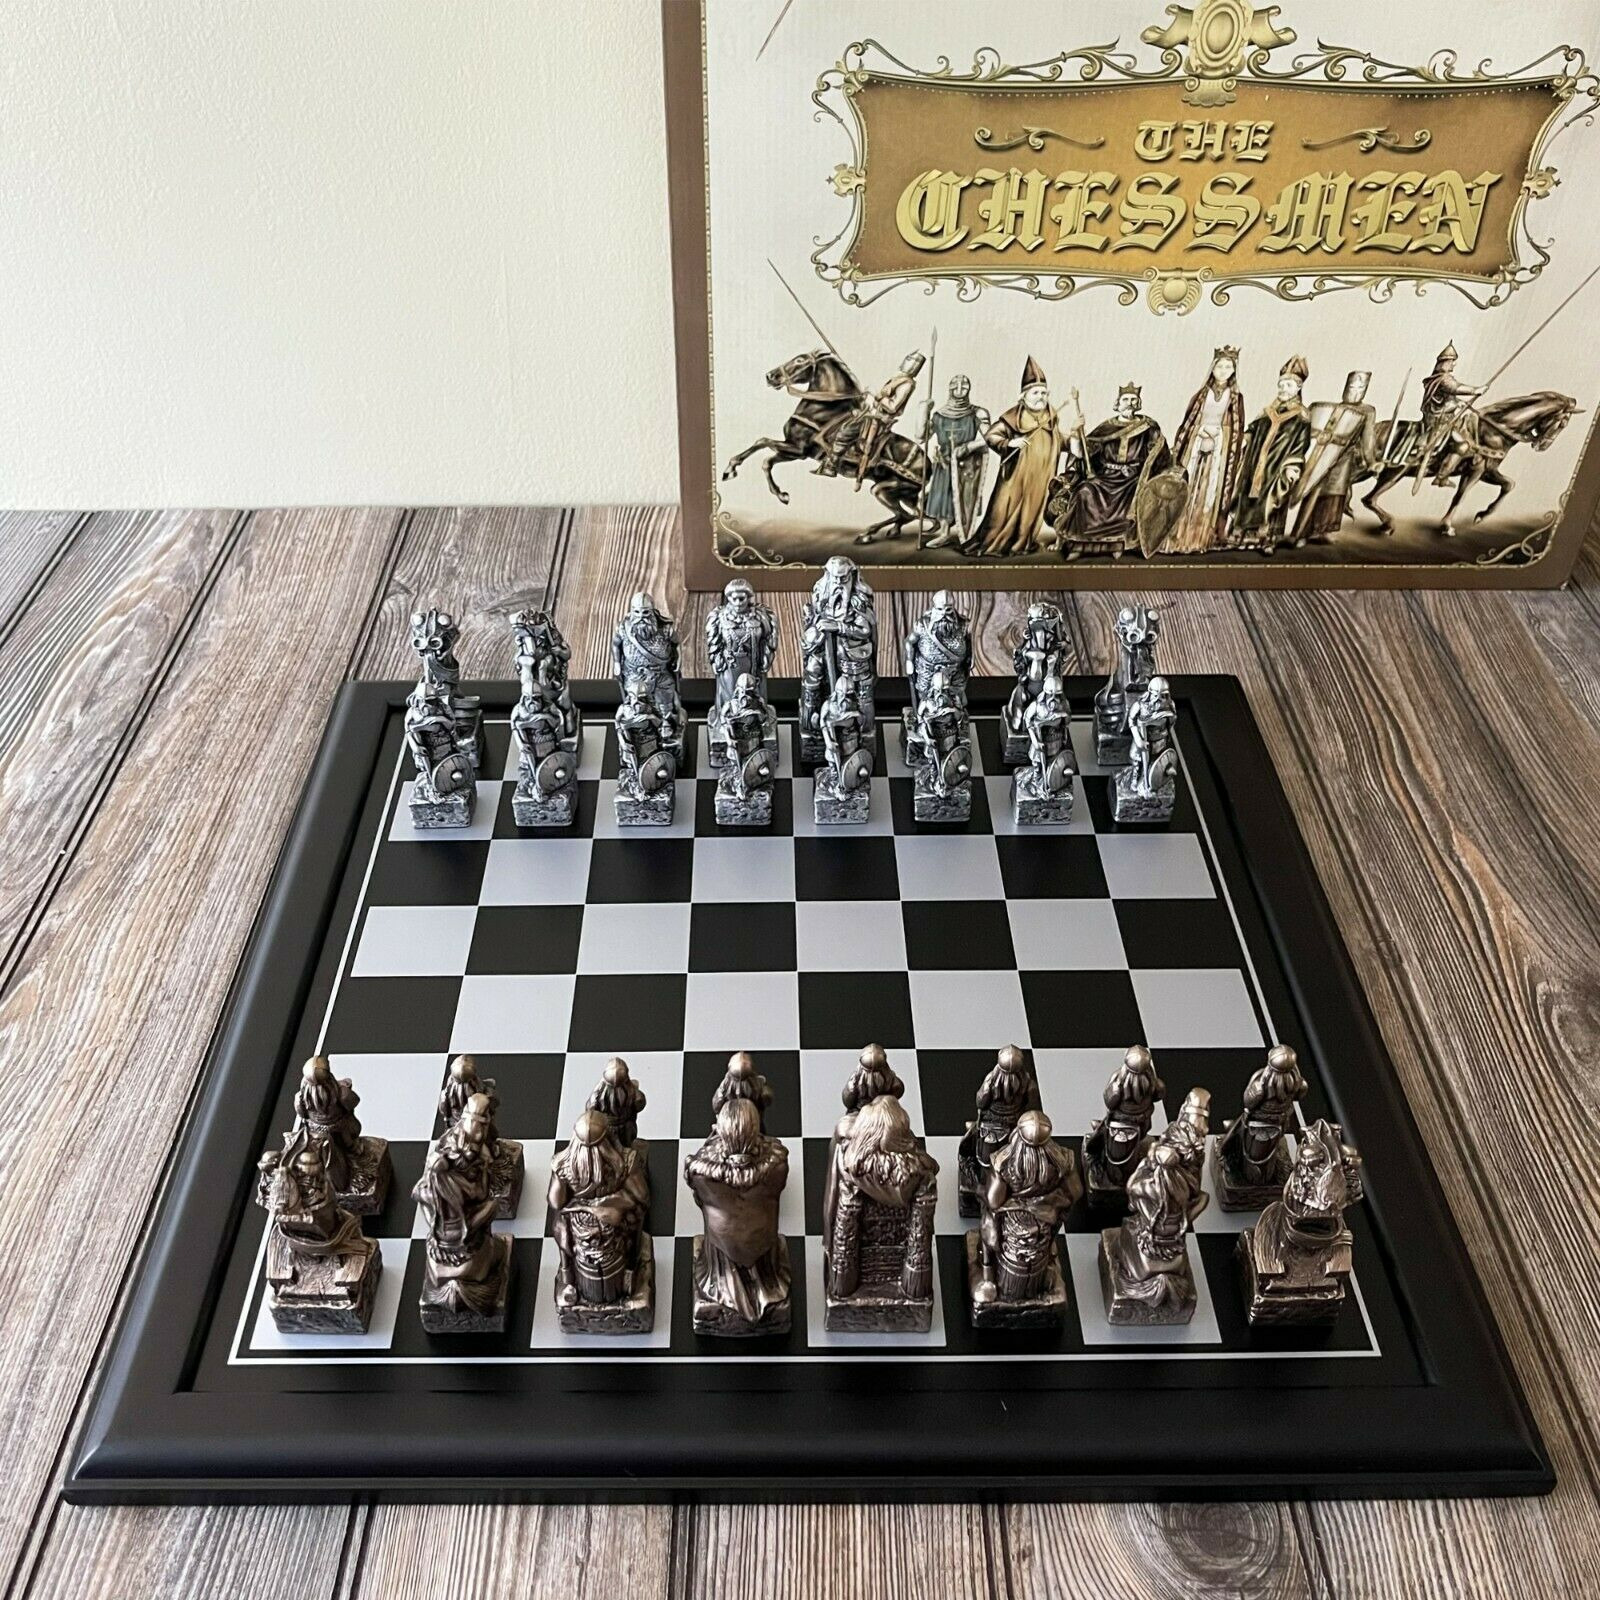 Chessman Nordic Viking Chess Set Home Decorative Chess With Wooden Board Gift